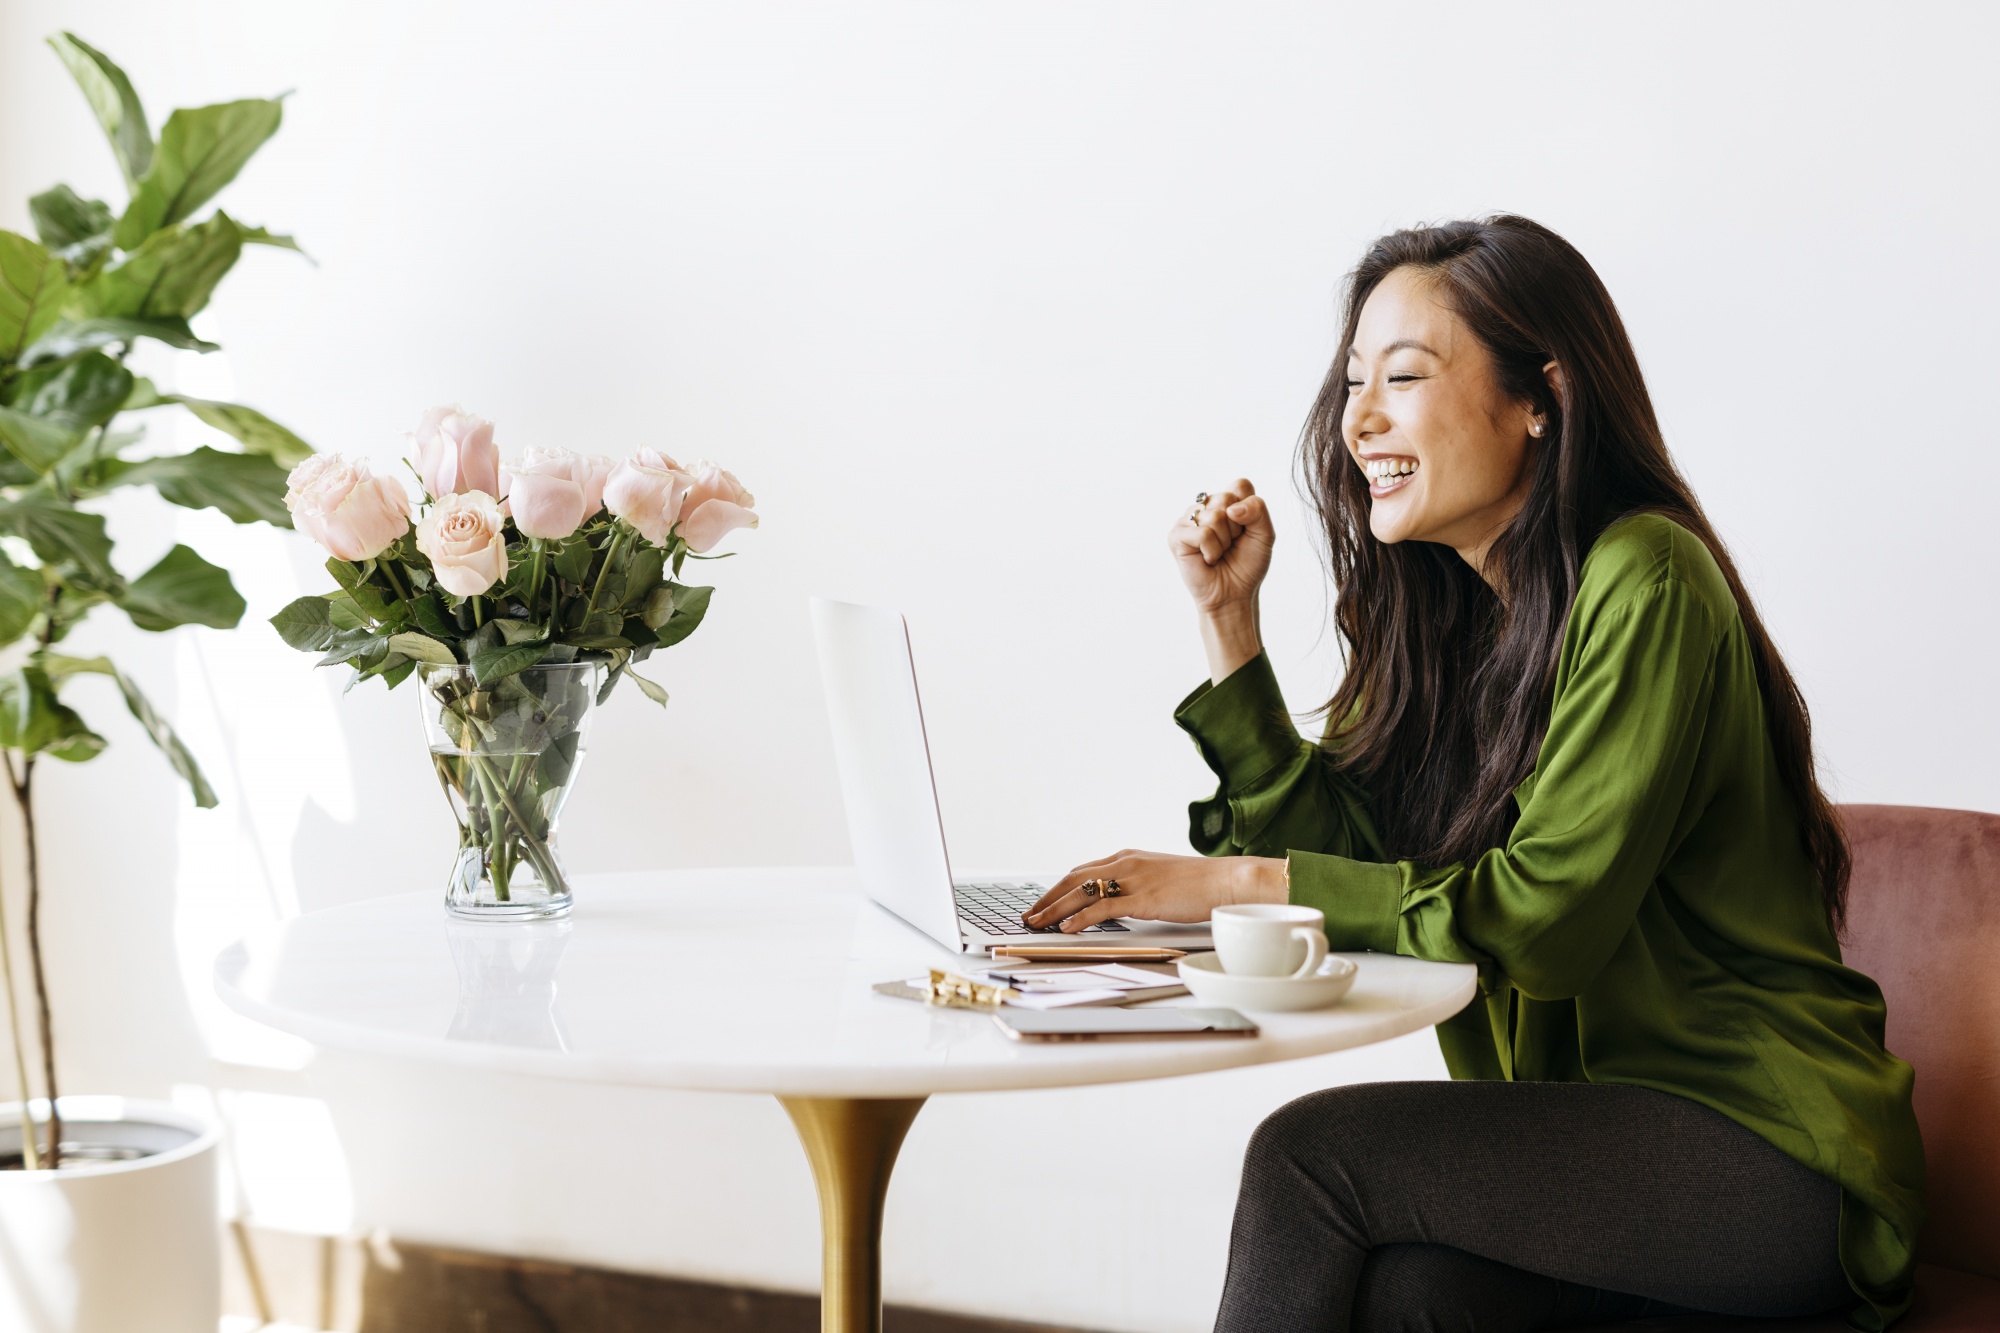 dating profile after 40, Asian woman smiling happy while writing on laptop